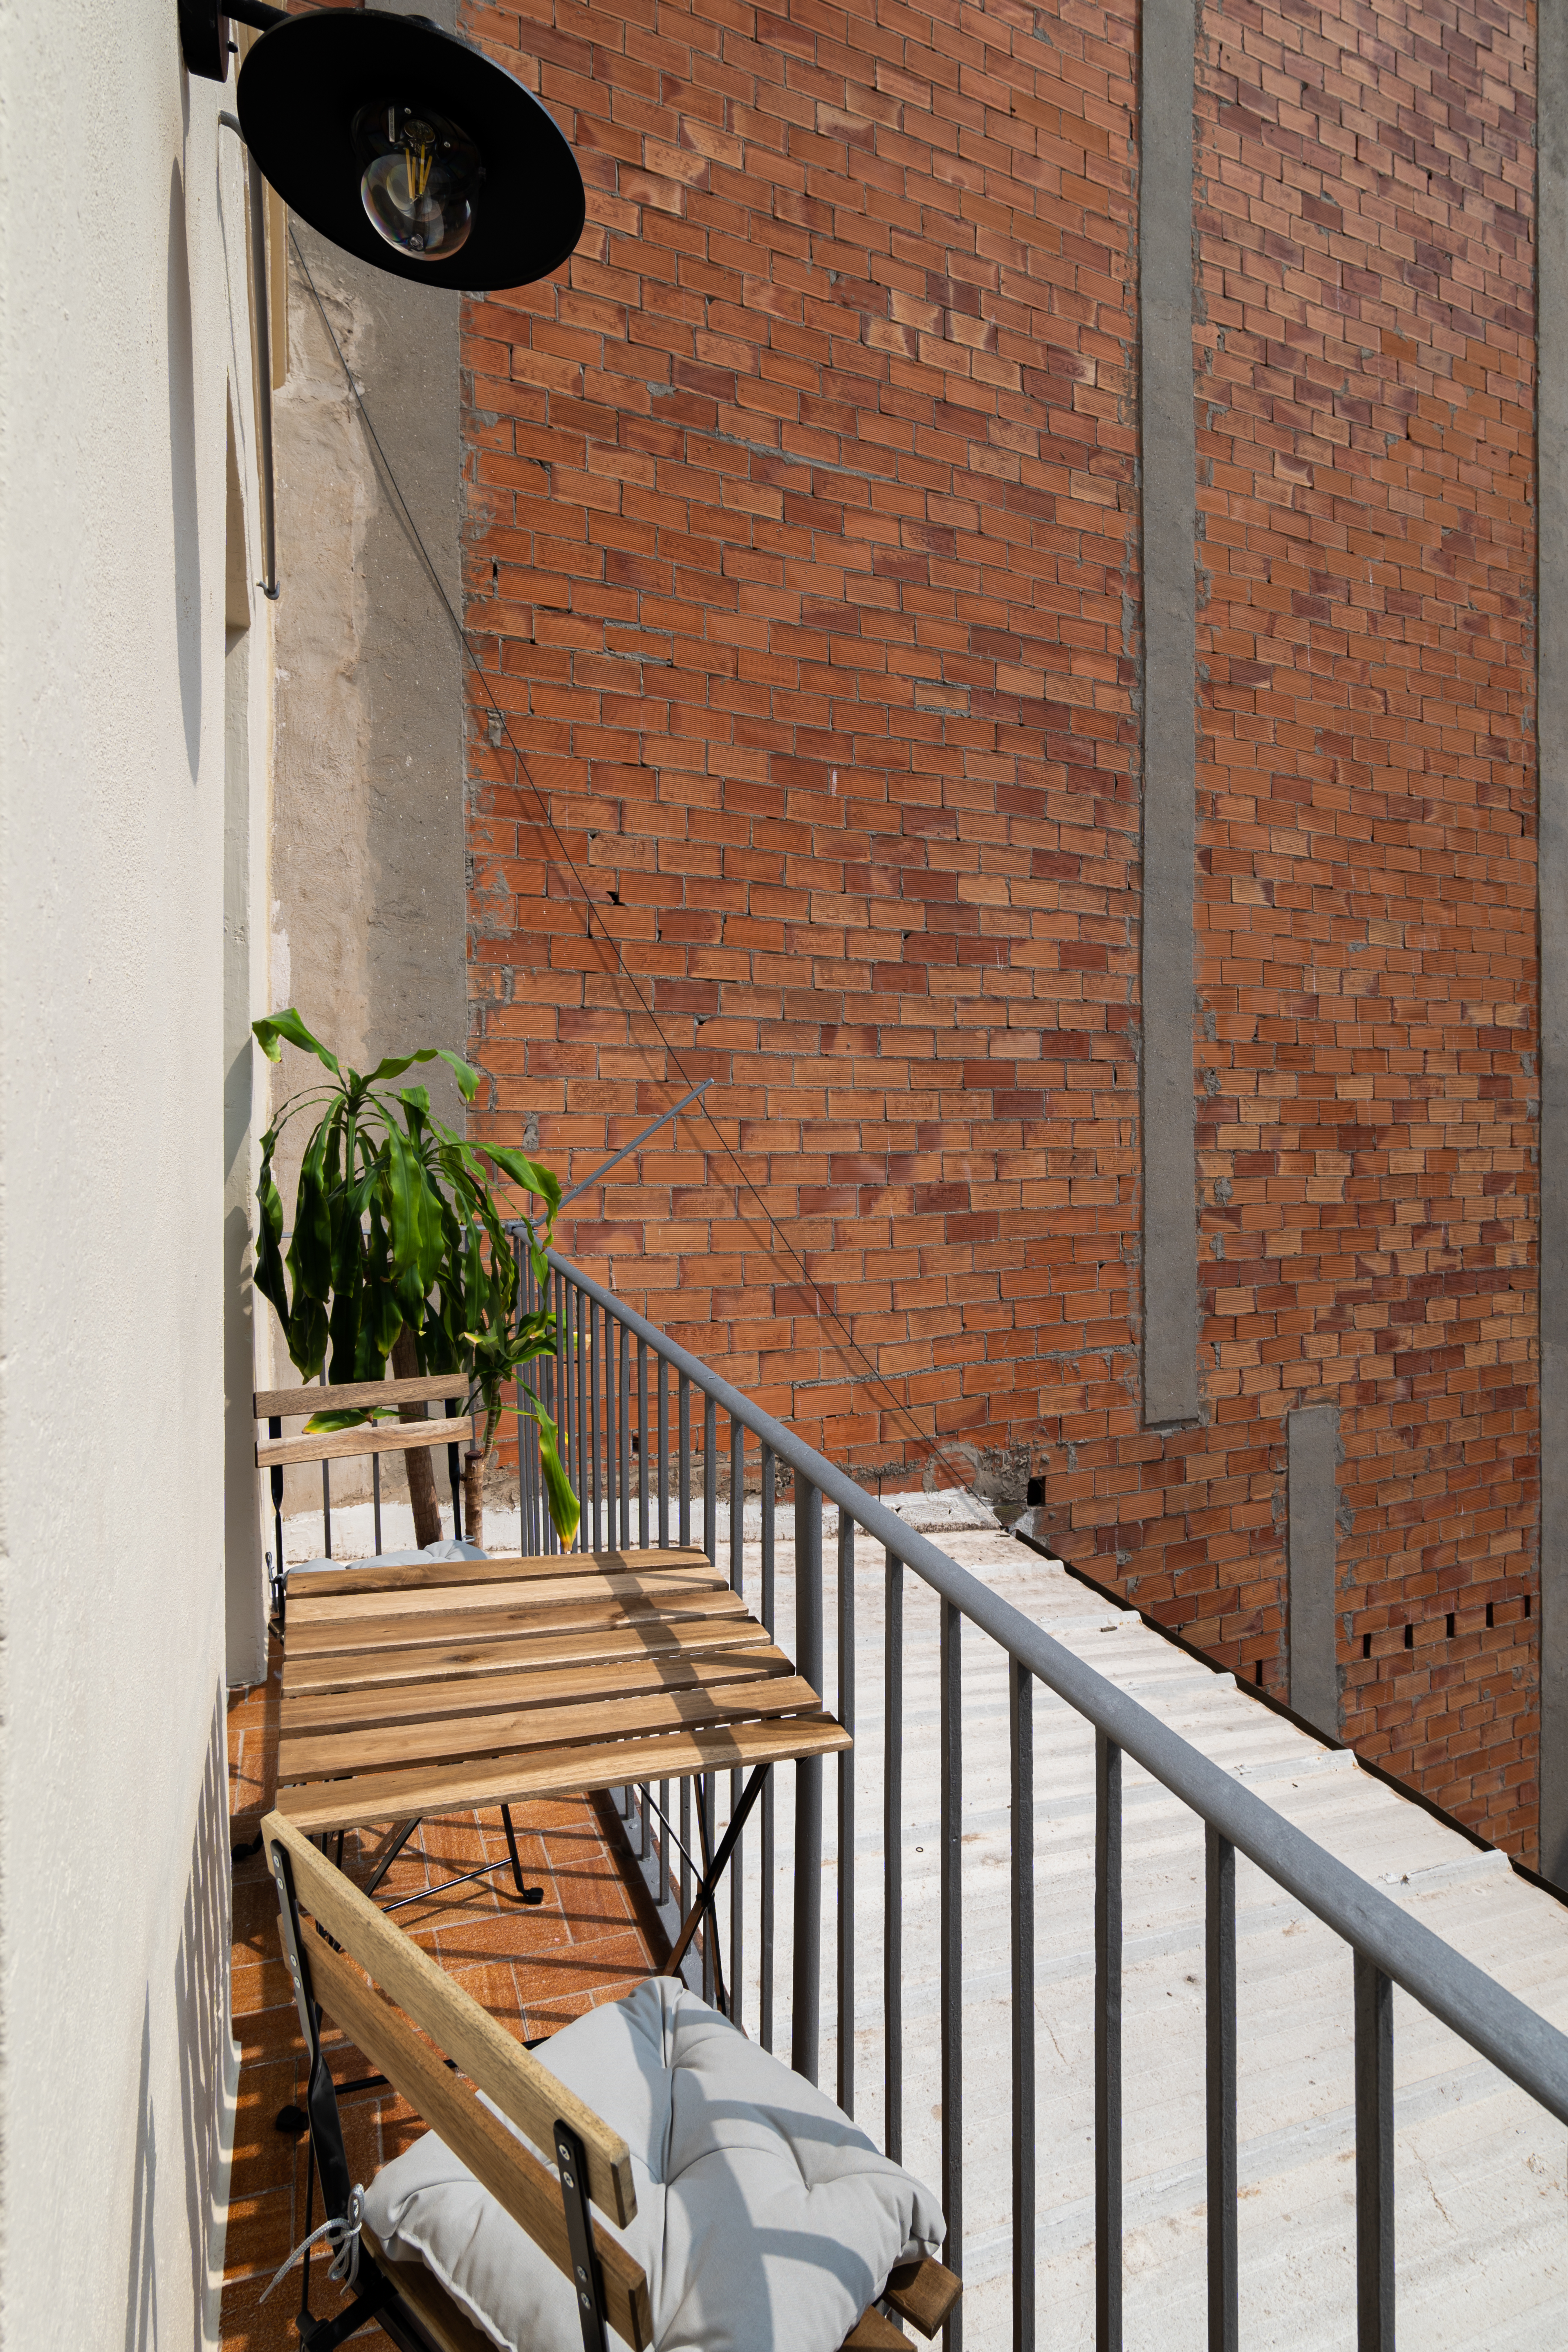 A small balcony with wooden furniture and a potted plant, flanked by a brick wall and railing